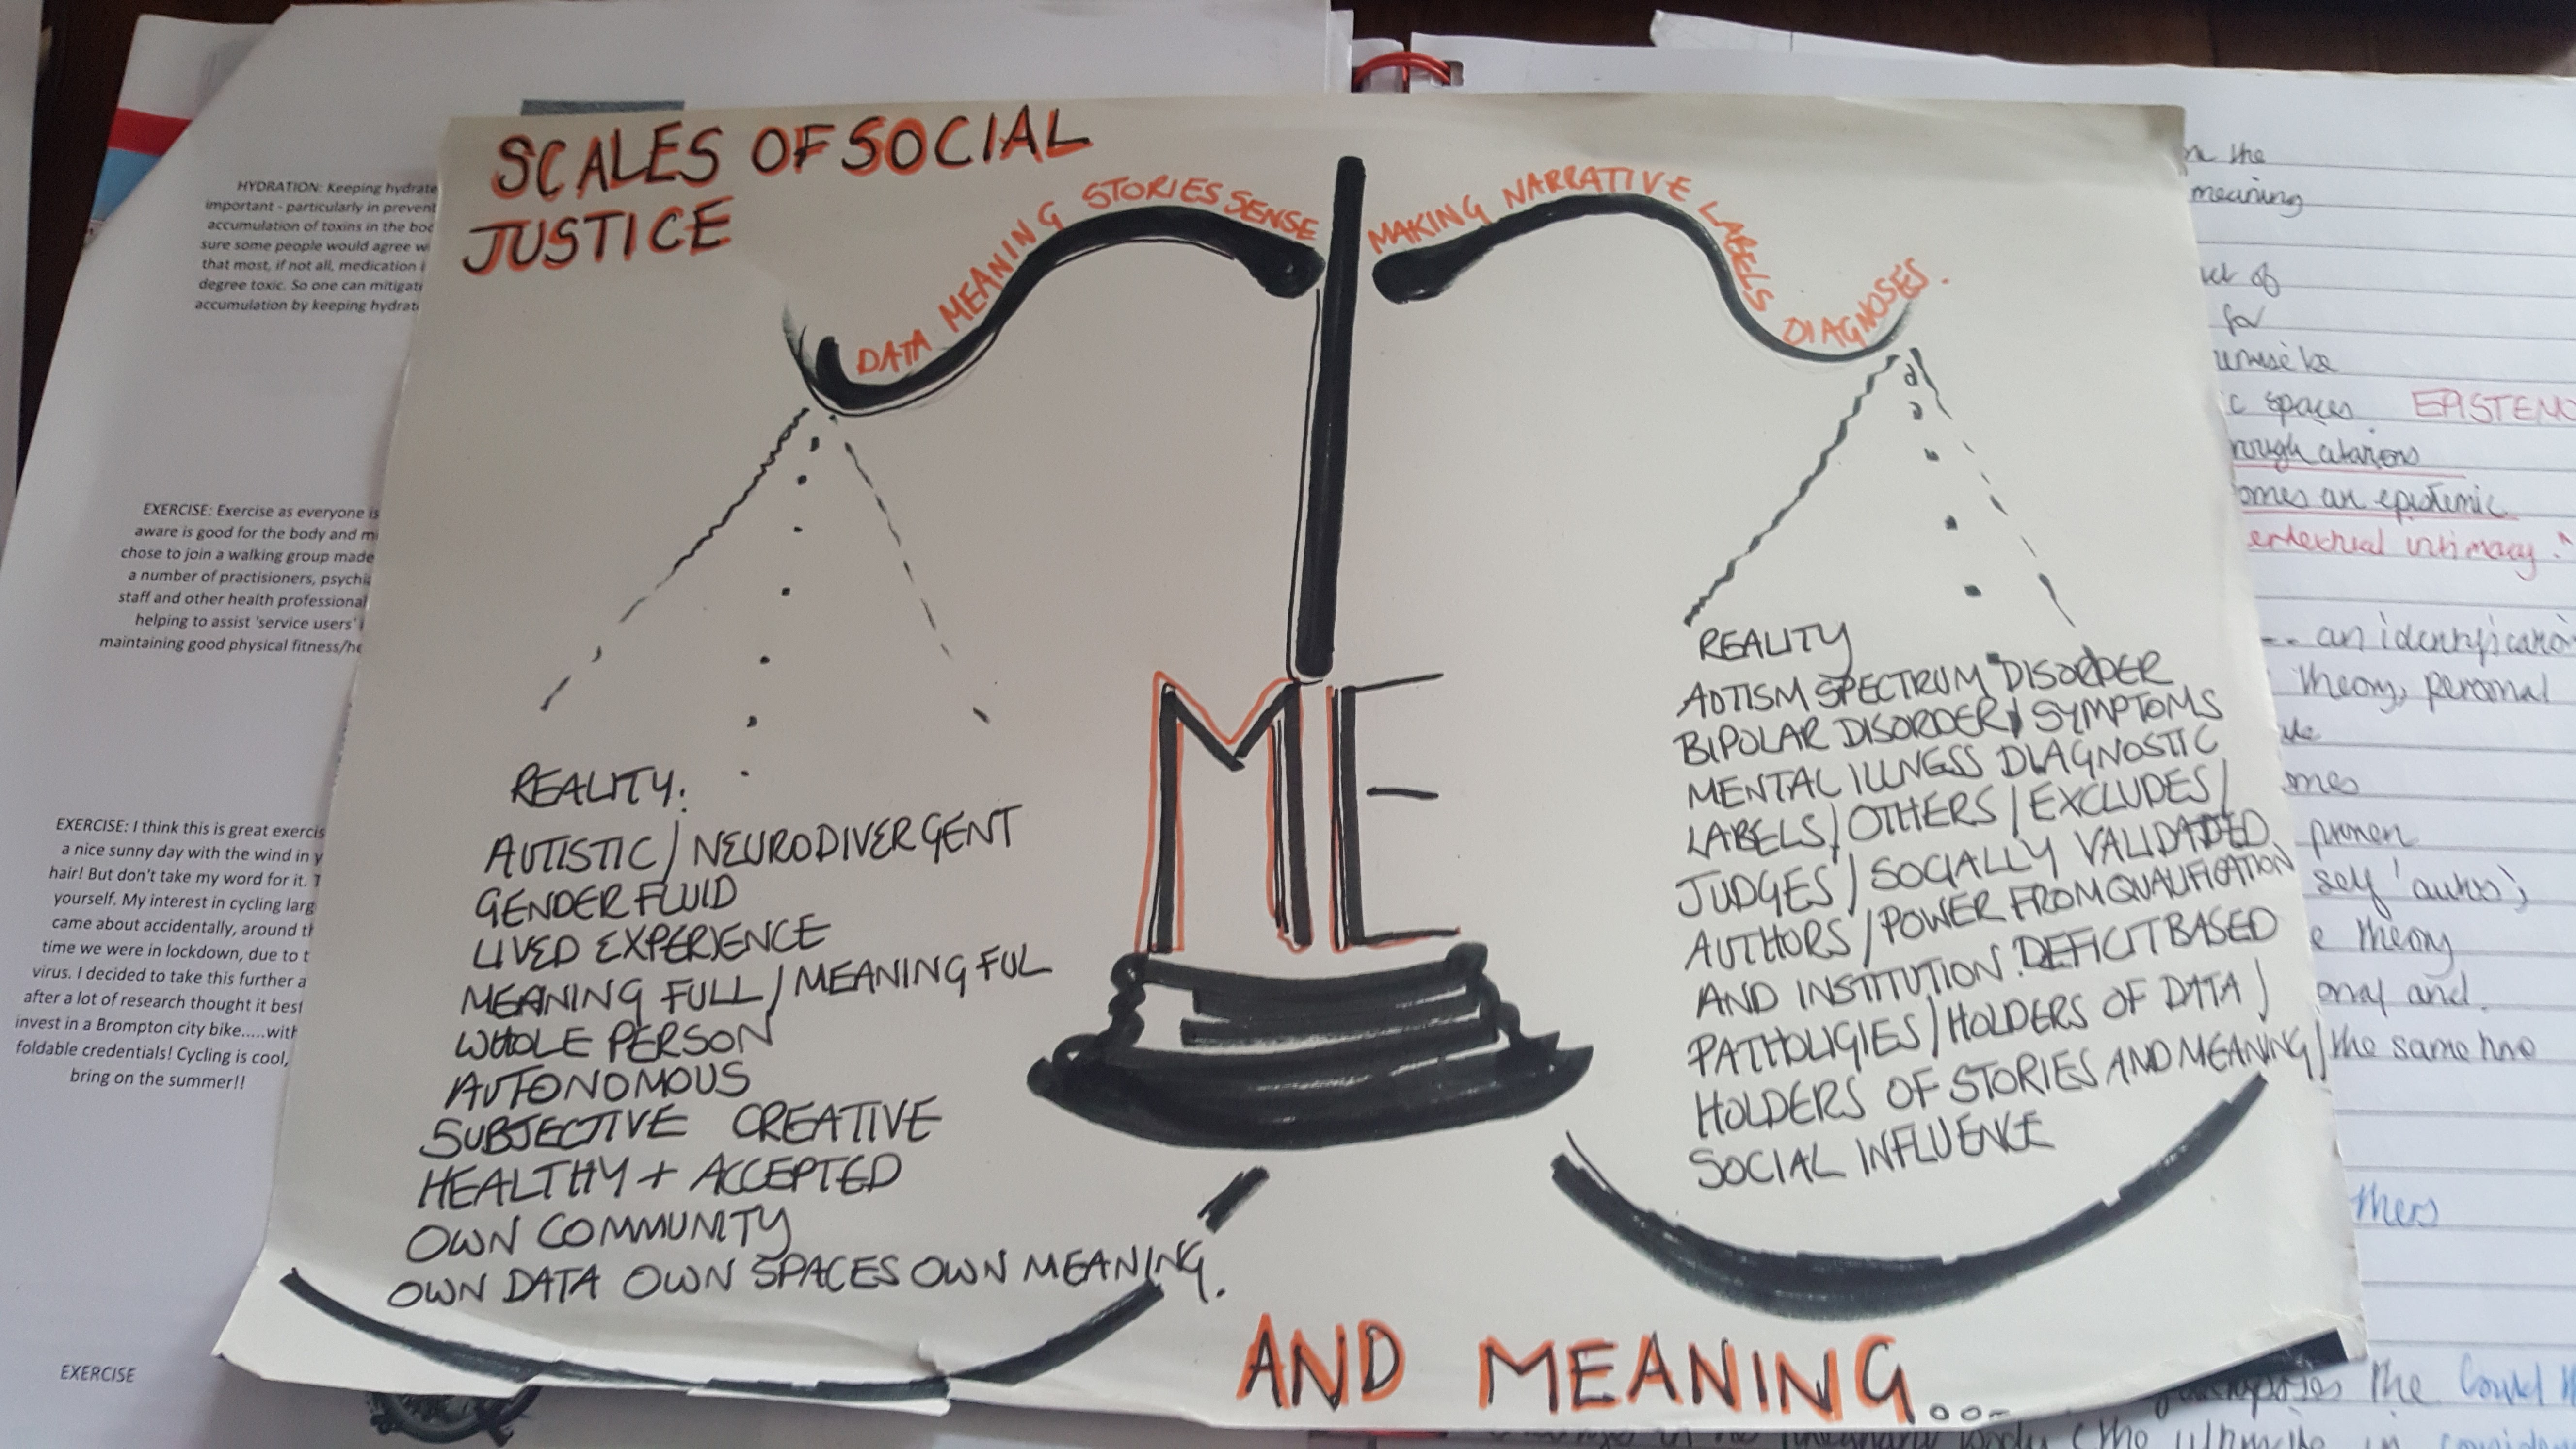 The scales of social justice: an image exploring concepts in my  phd research